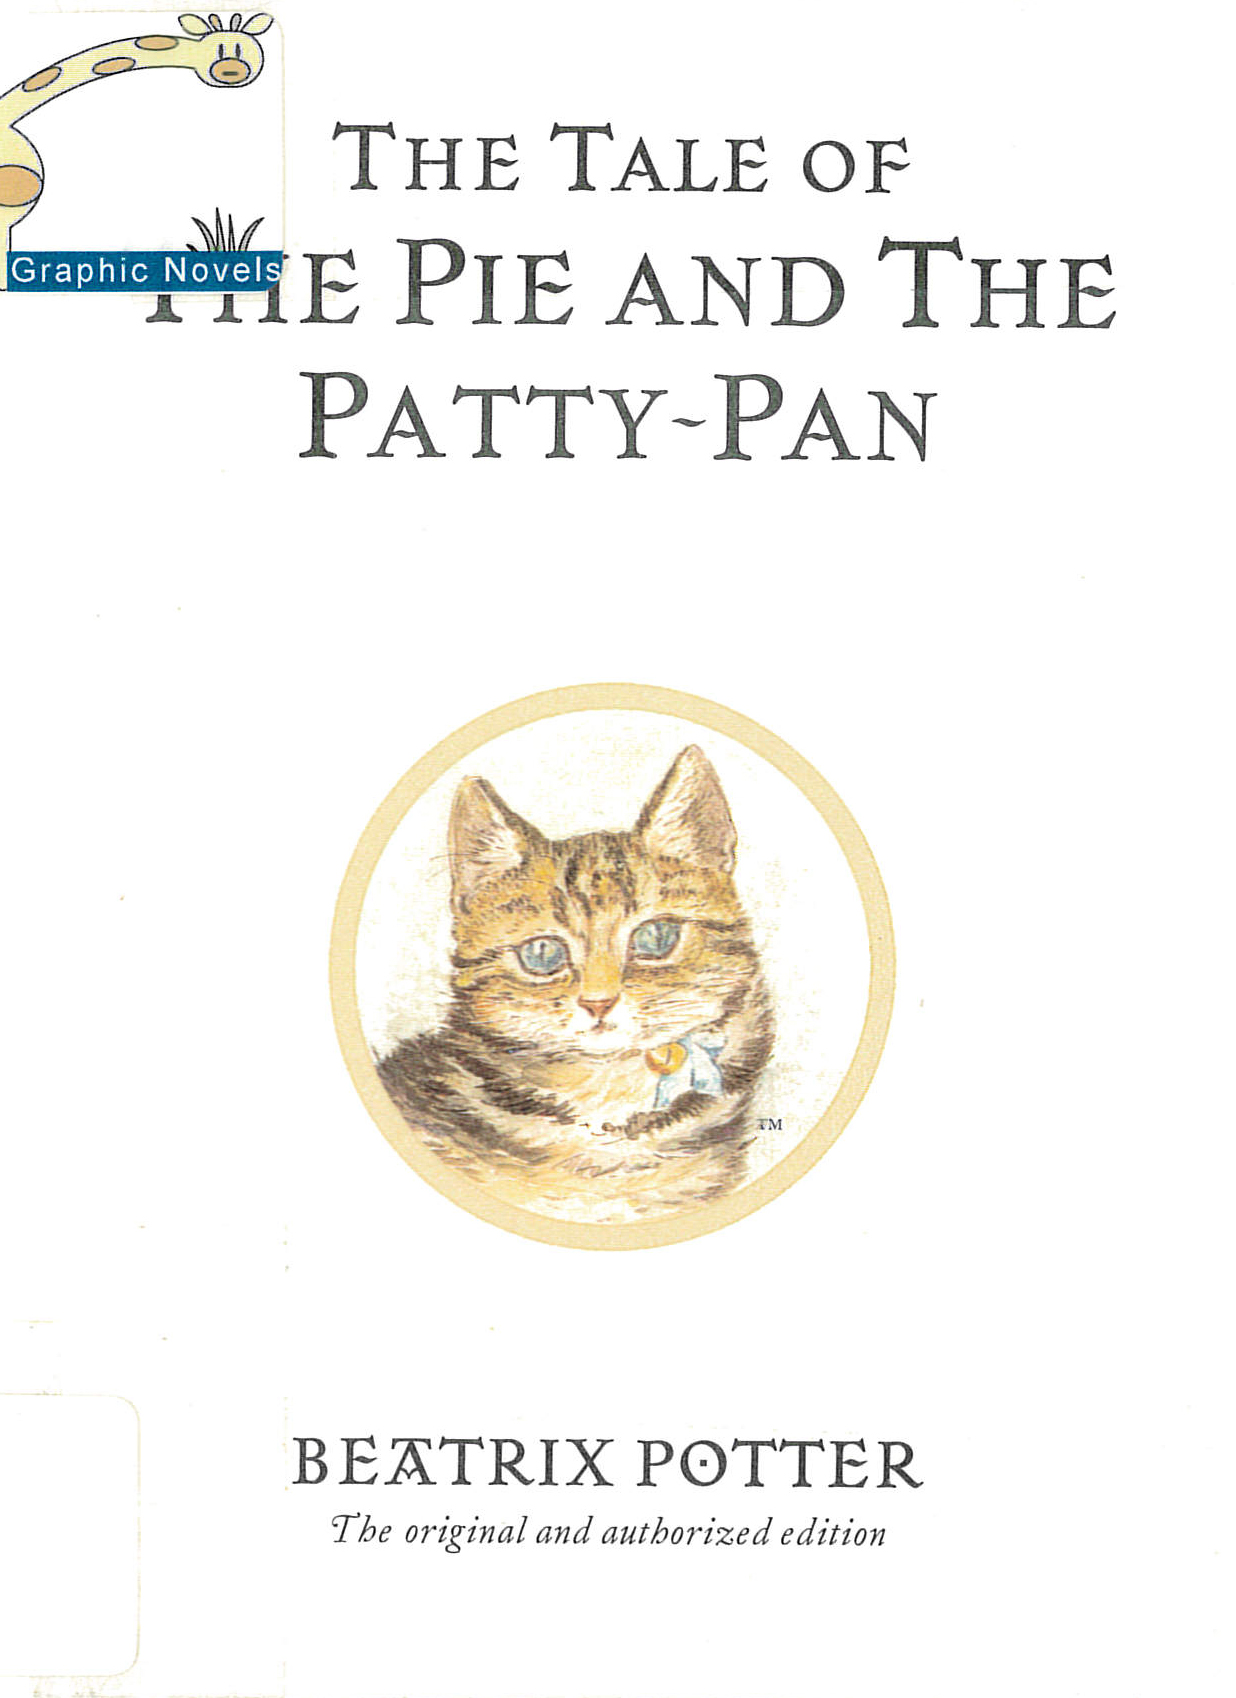 The tale of the pie and the patty-pan